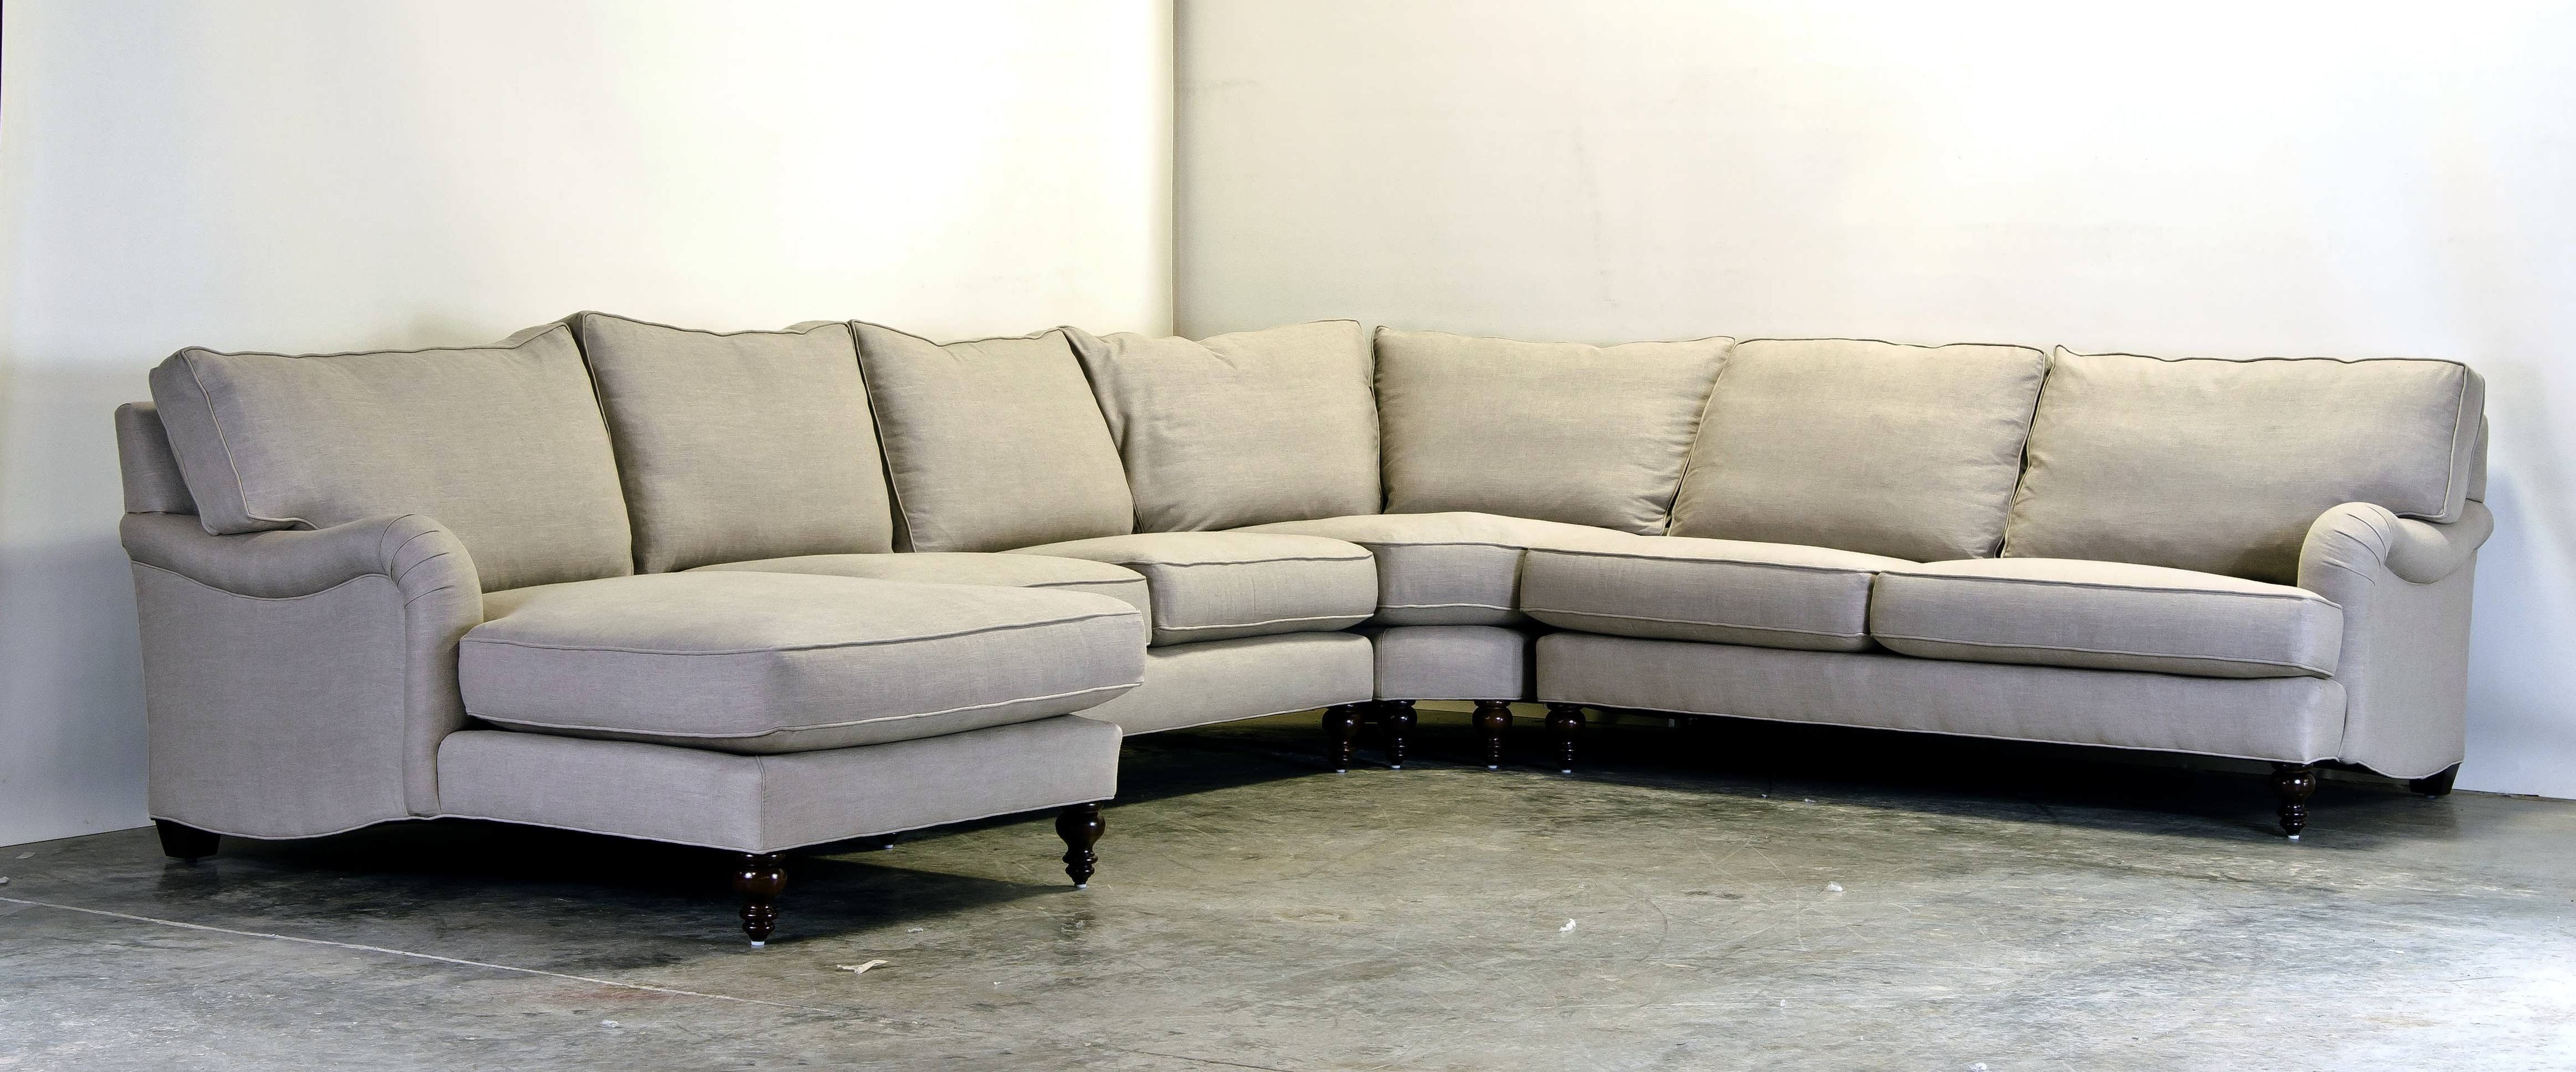 Sofa : Mini Sectional Couch Sofa Couch Sectional Furniture Small Inside 2018 Small Couches With Chaise (View 9 of 15)